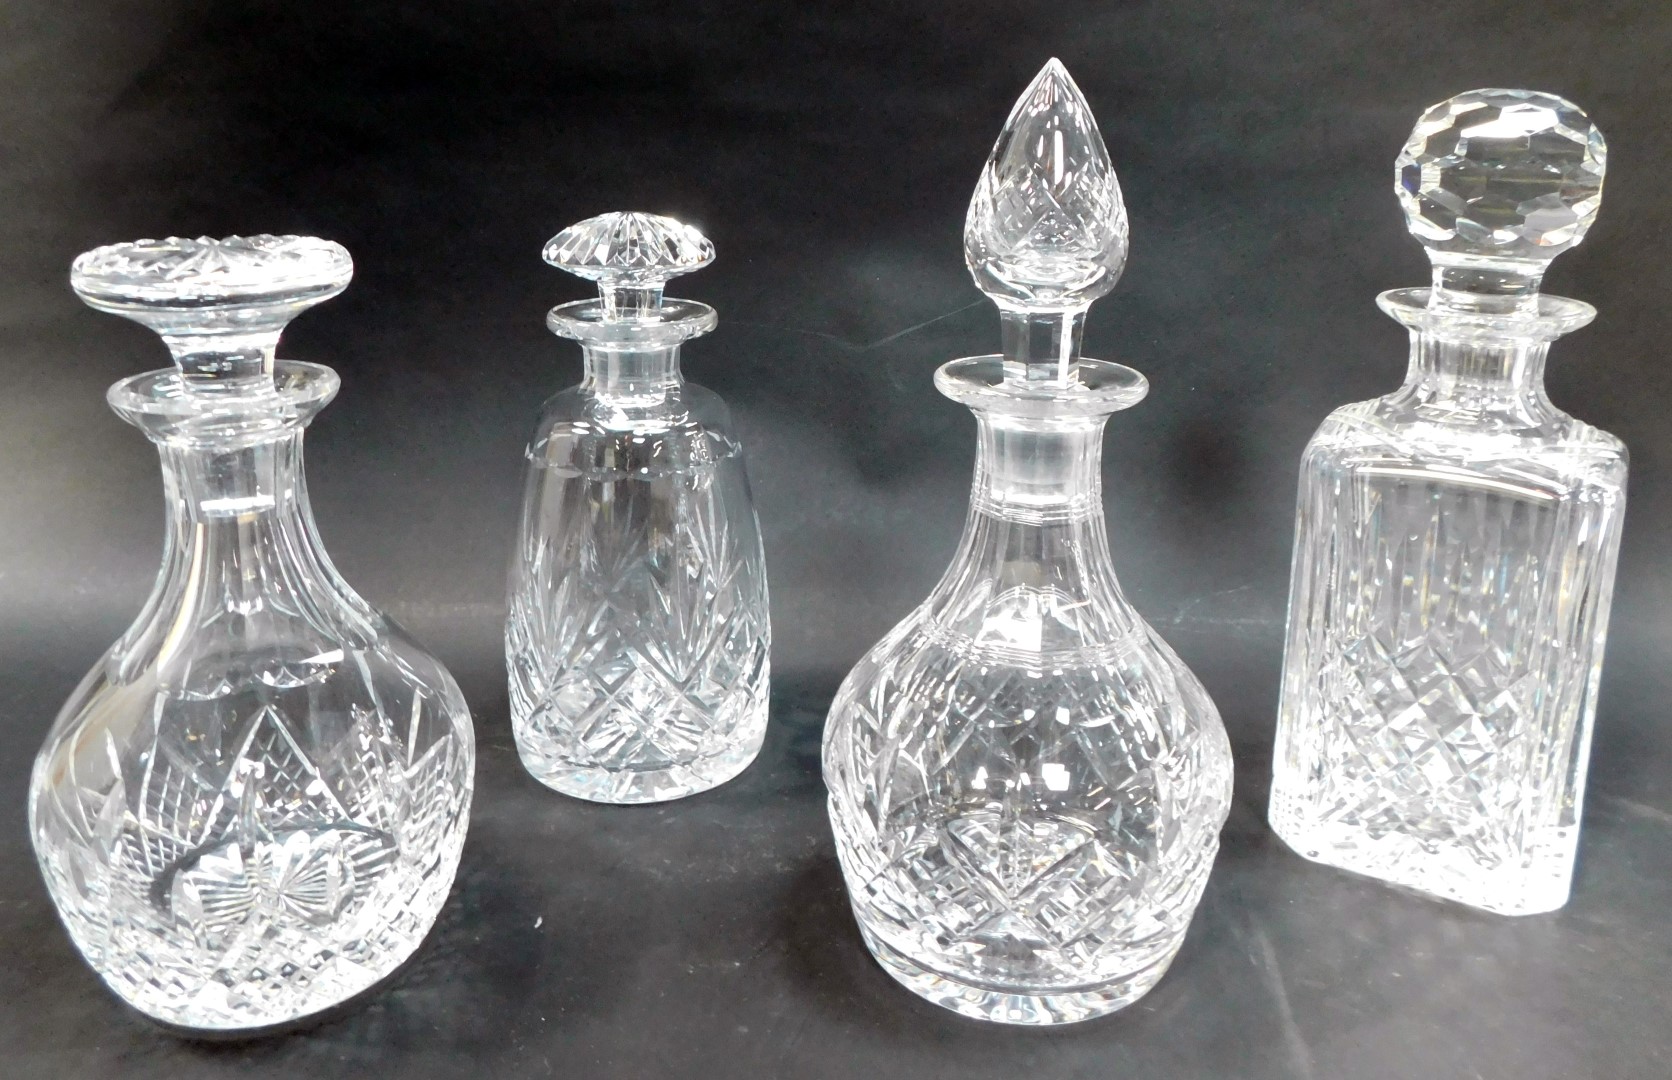 Four cut glass decanters, comprising a square decanter and stopper, 28cm high, cylindrical decanter